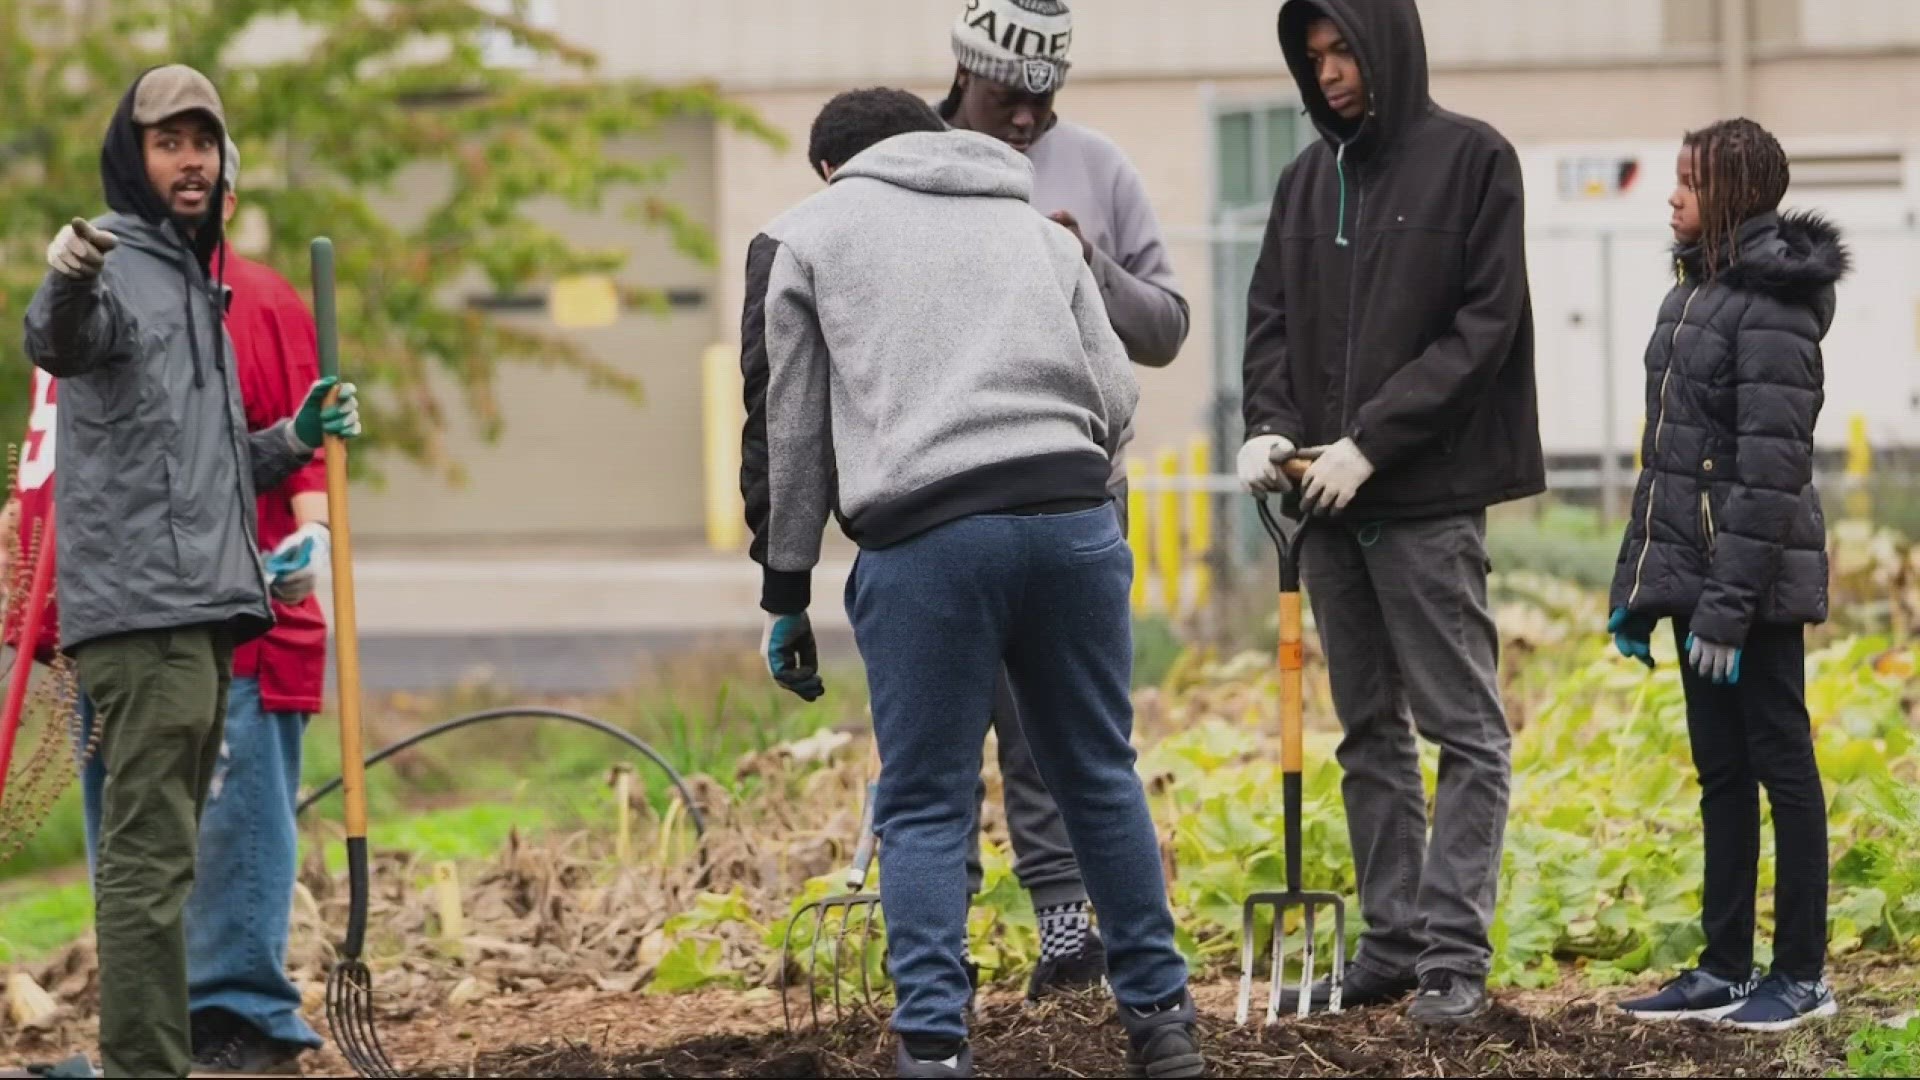 The Feed'em Freedom Foundation grows and distributes produce for food pantries. The nonprofit also educates BIPOC communities on how to grow their own food.